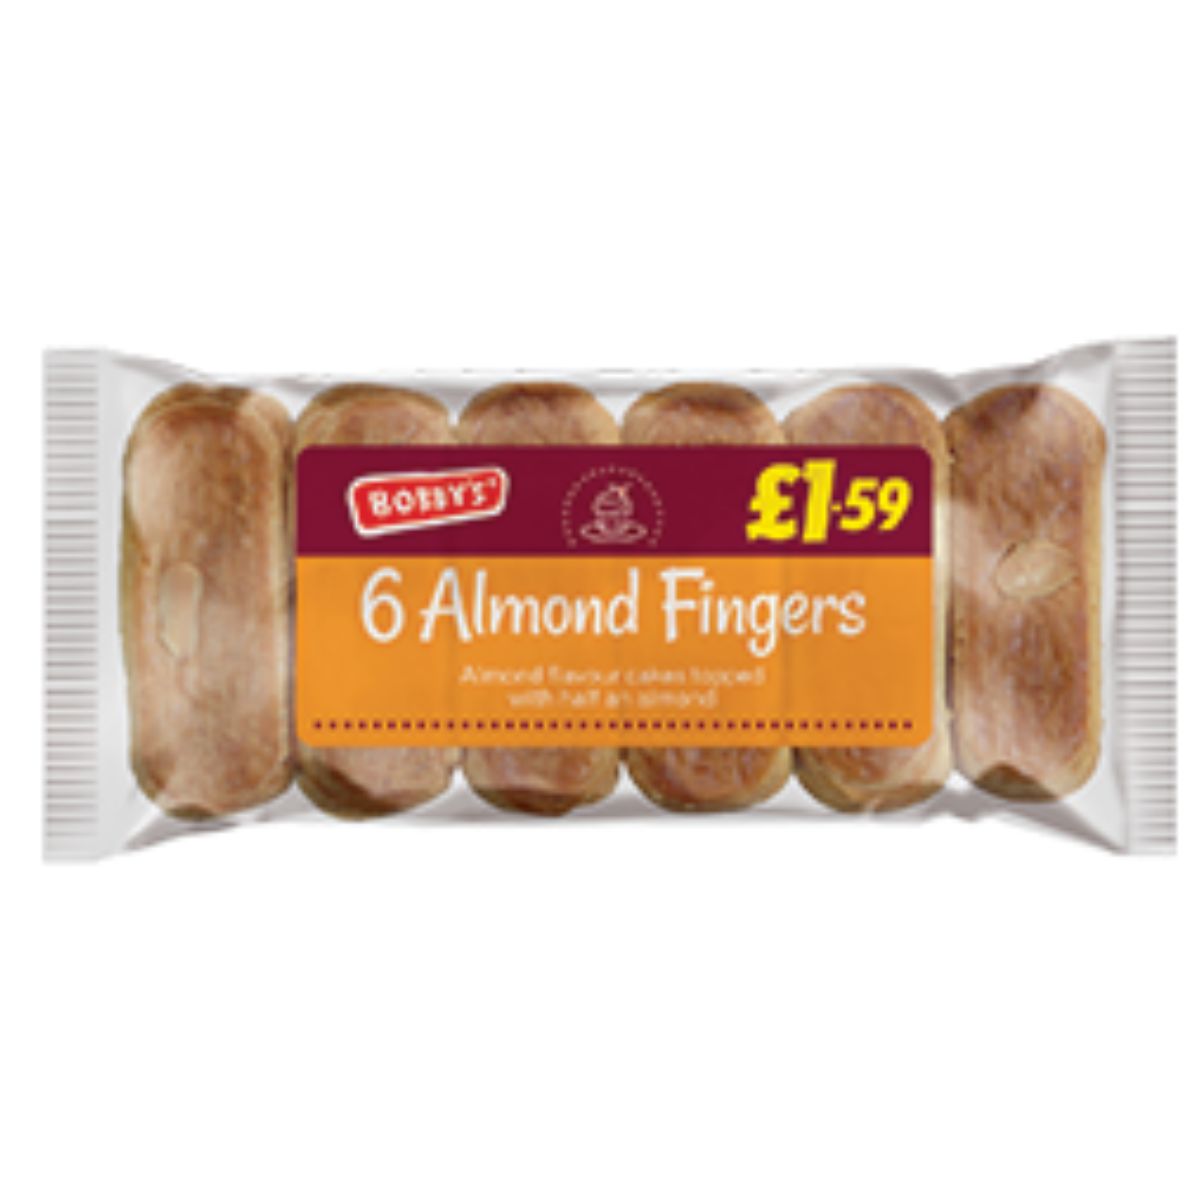 A package of Bobbys - Almond Fingers - 6pcs priced at £1.59.